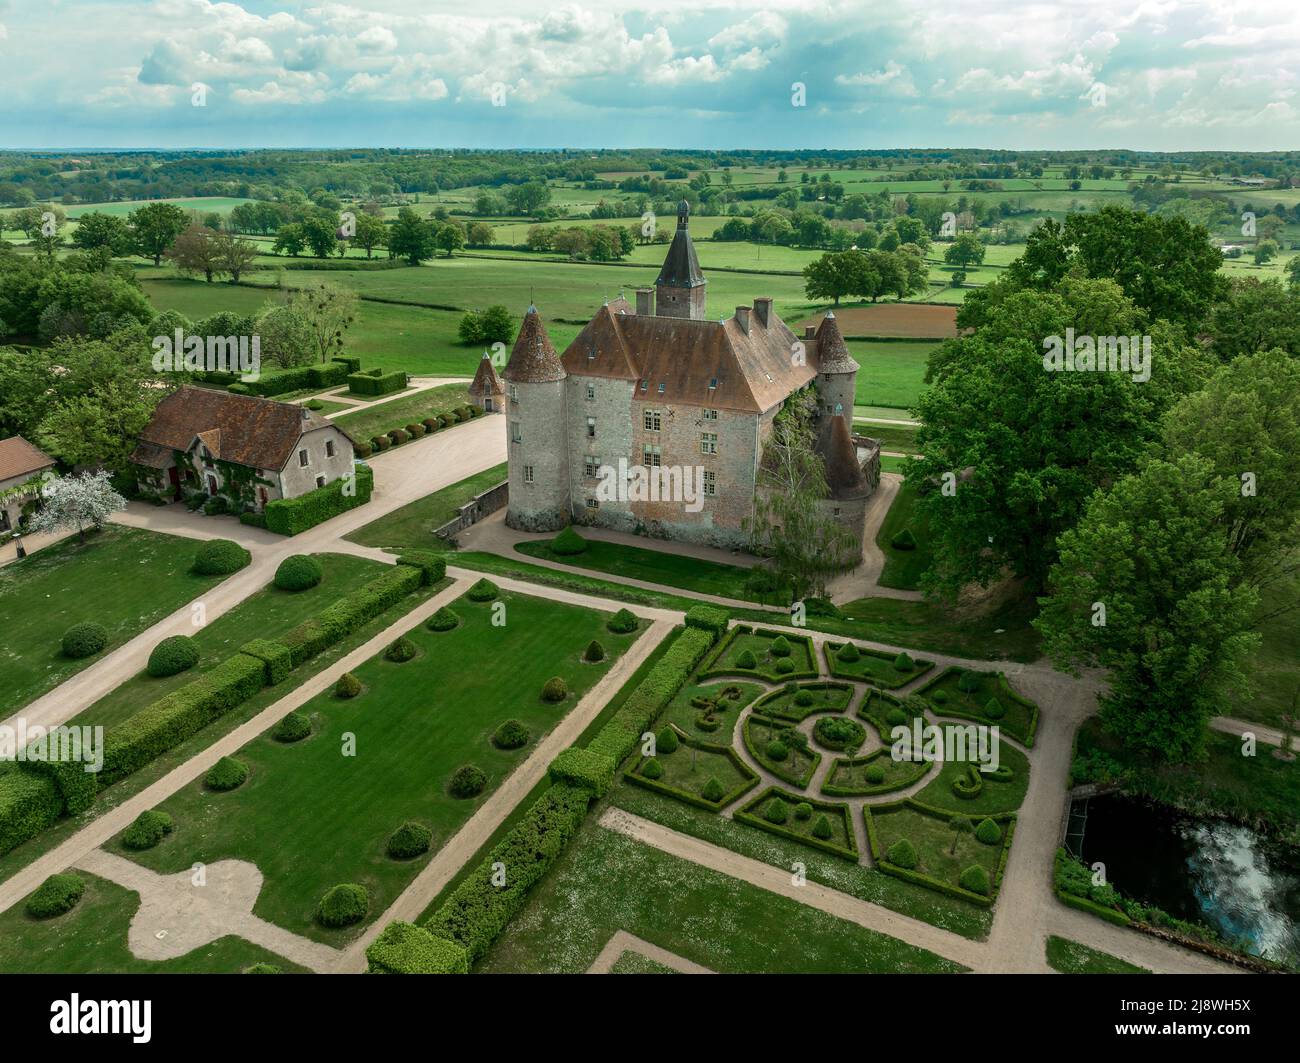 Aerial view of Chateau de Beauvoir restored medieval French castle with bridge, towers, manicured lawn and garden Stock Photo